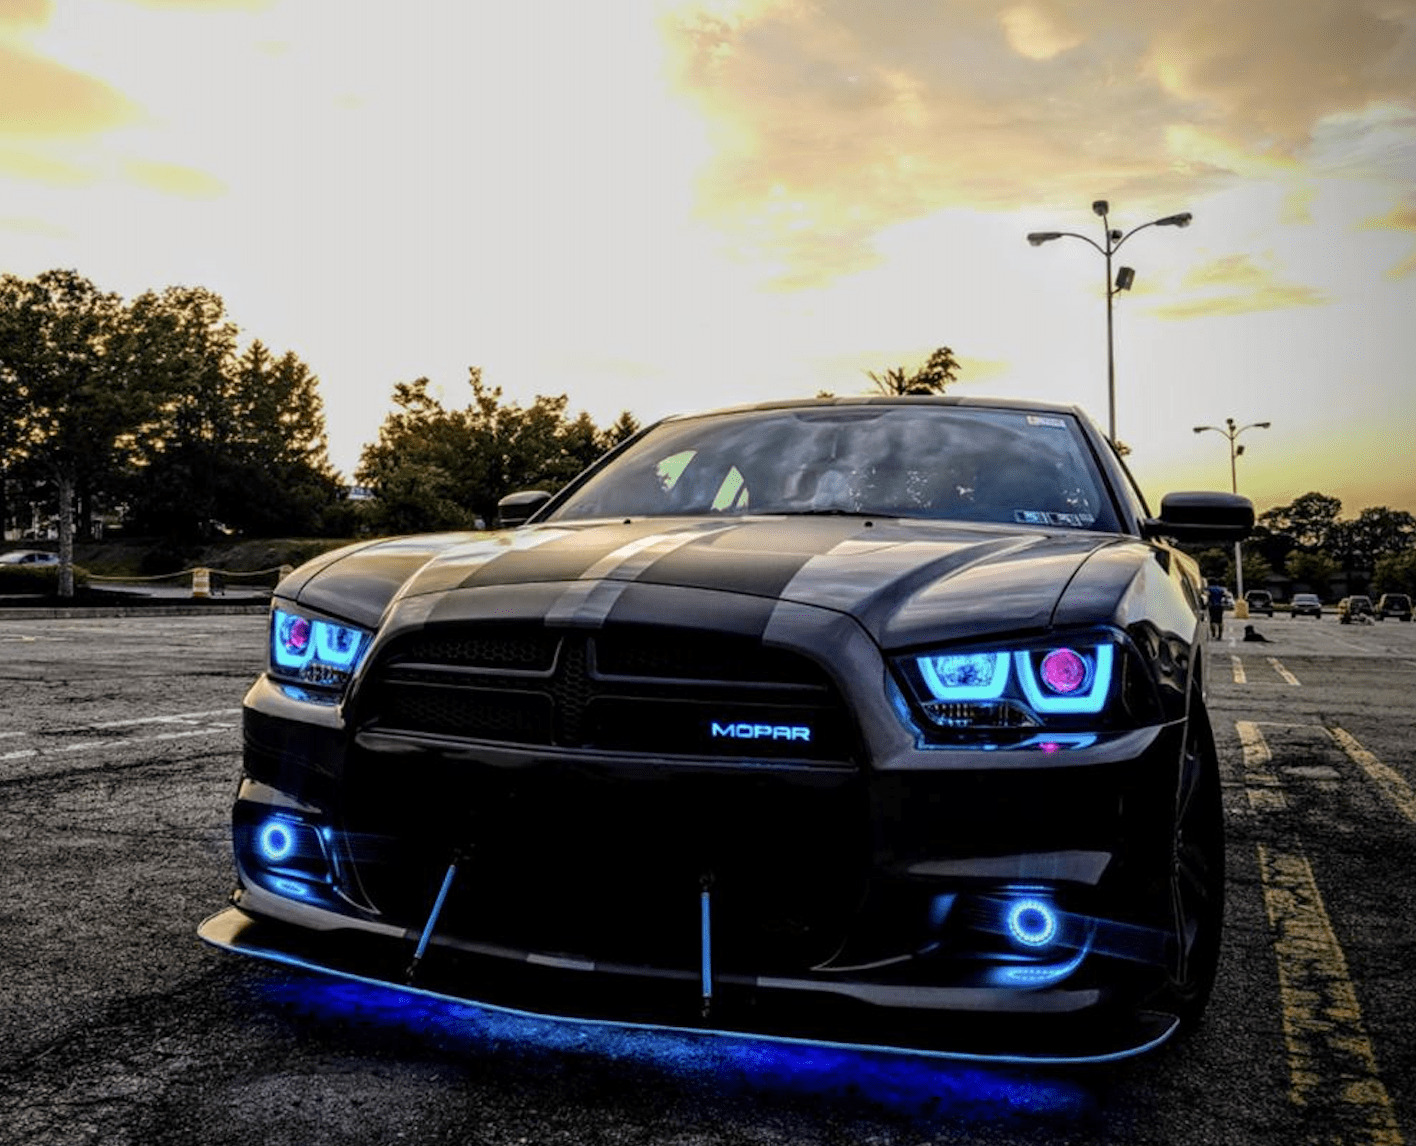 2011-2014 Dodge Charger Spec-D: Multicolor Built Headlights - RGB Halo Kits Multicolor Flow Series Color Chasing RGBWA LED headlight kit Colorshift Oracle Lighting Trendz OneUpLighting Morimoto theretrofitsource AutoLEDTech Diode Dynamics